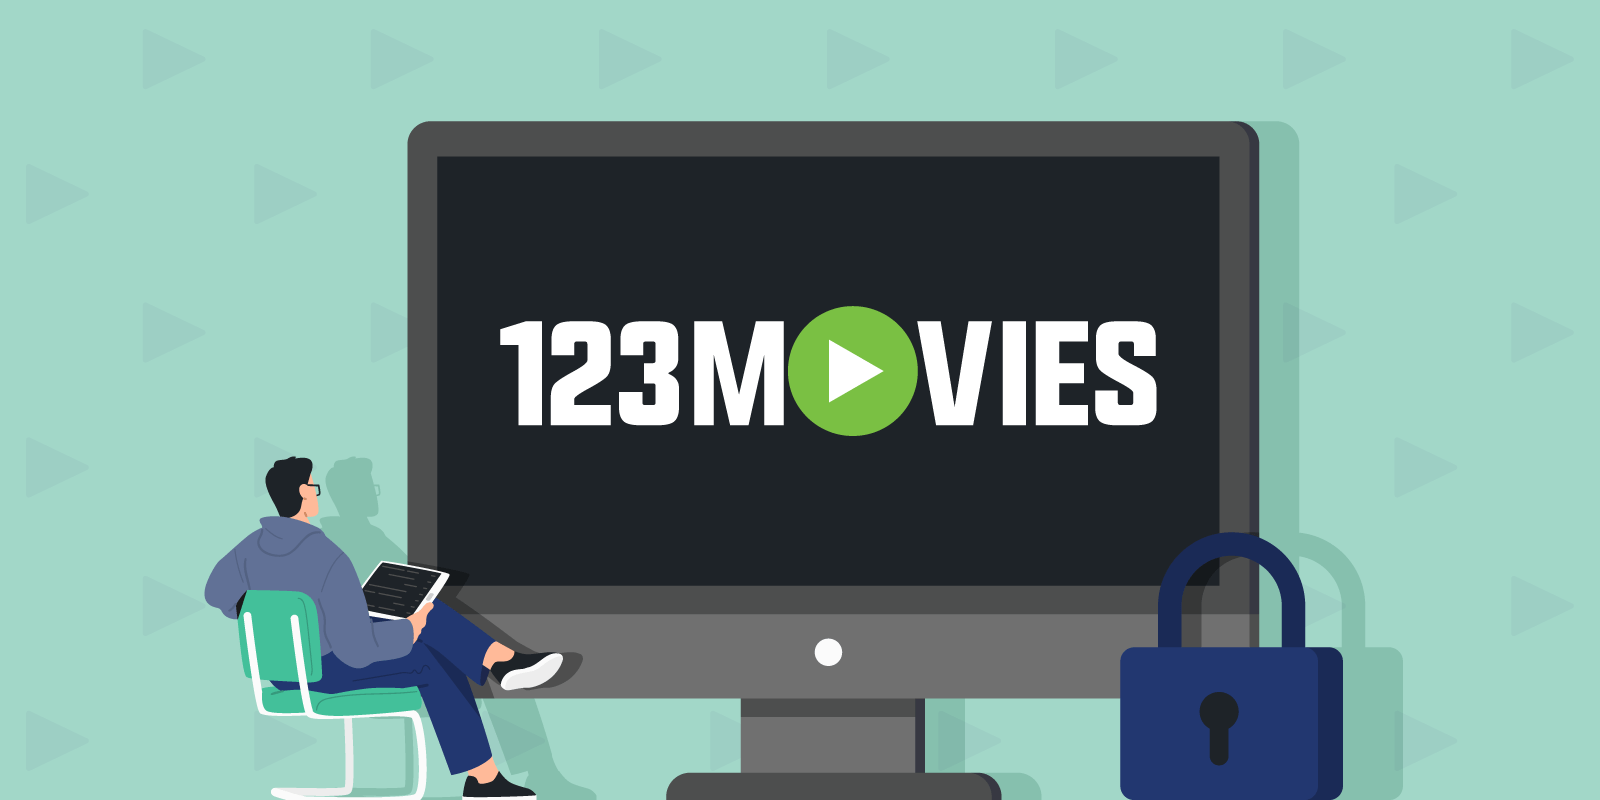 how-to-watch-123movies-safely-featured-image-8334361